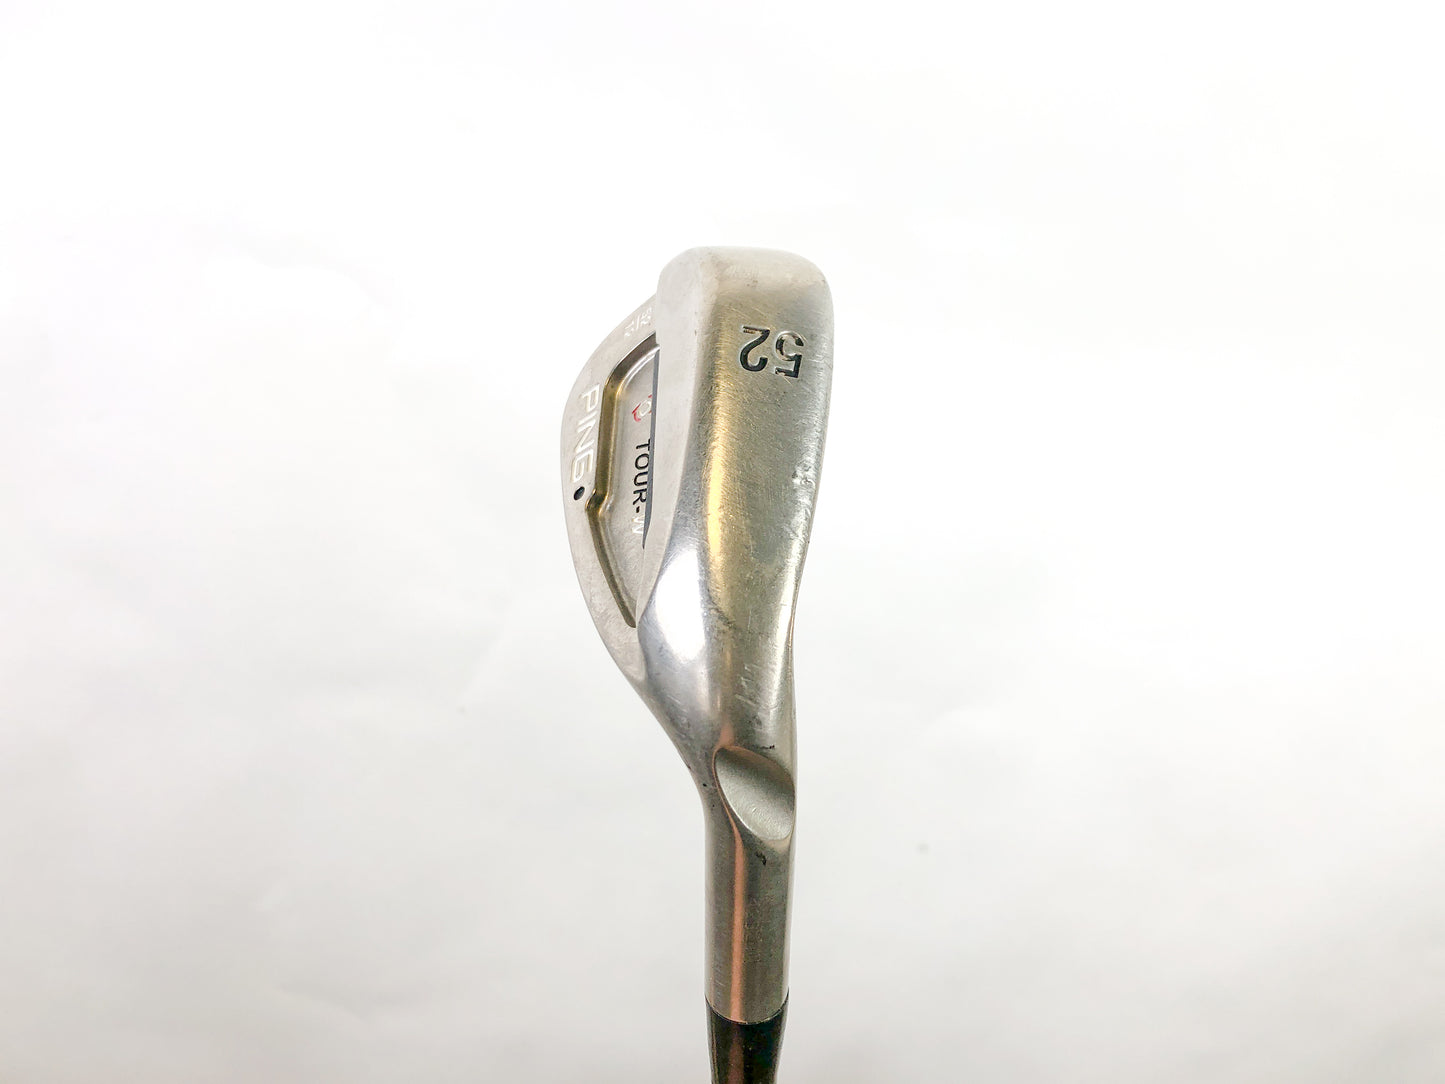 Used Ping Tour-W Brushed Silver Gap Wedge - Right-Handed - 52 Degrees - Stiff Flex-Next Round